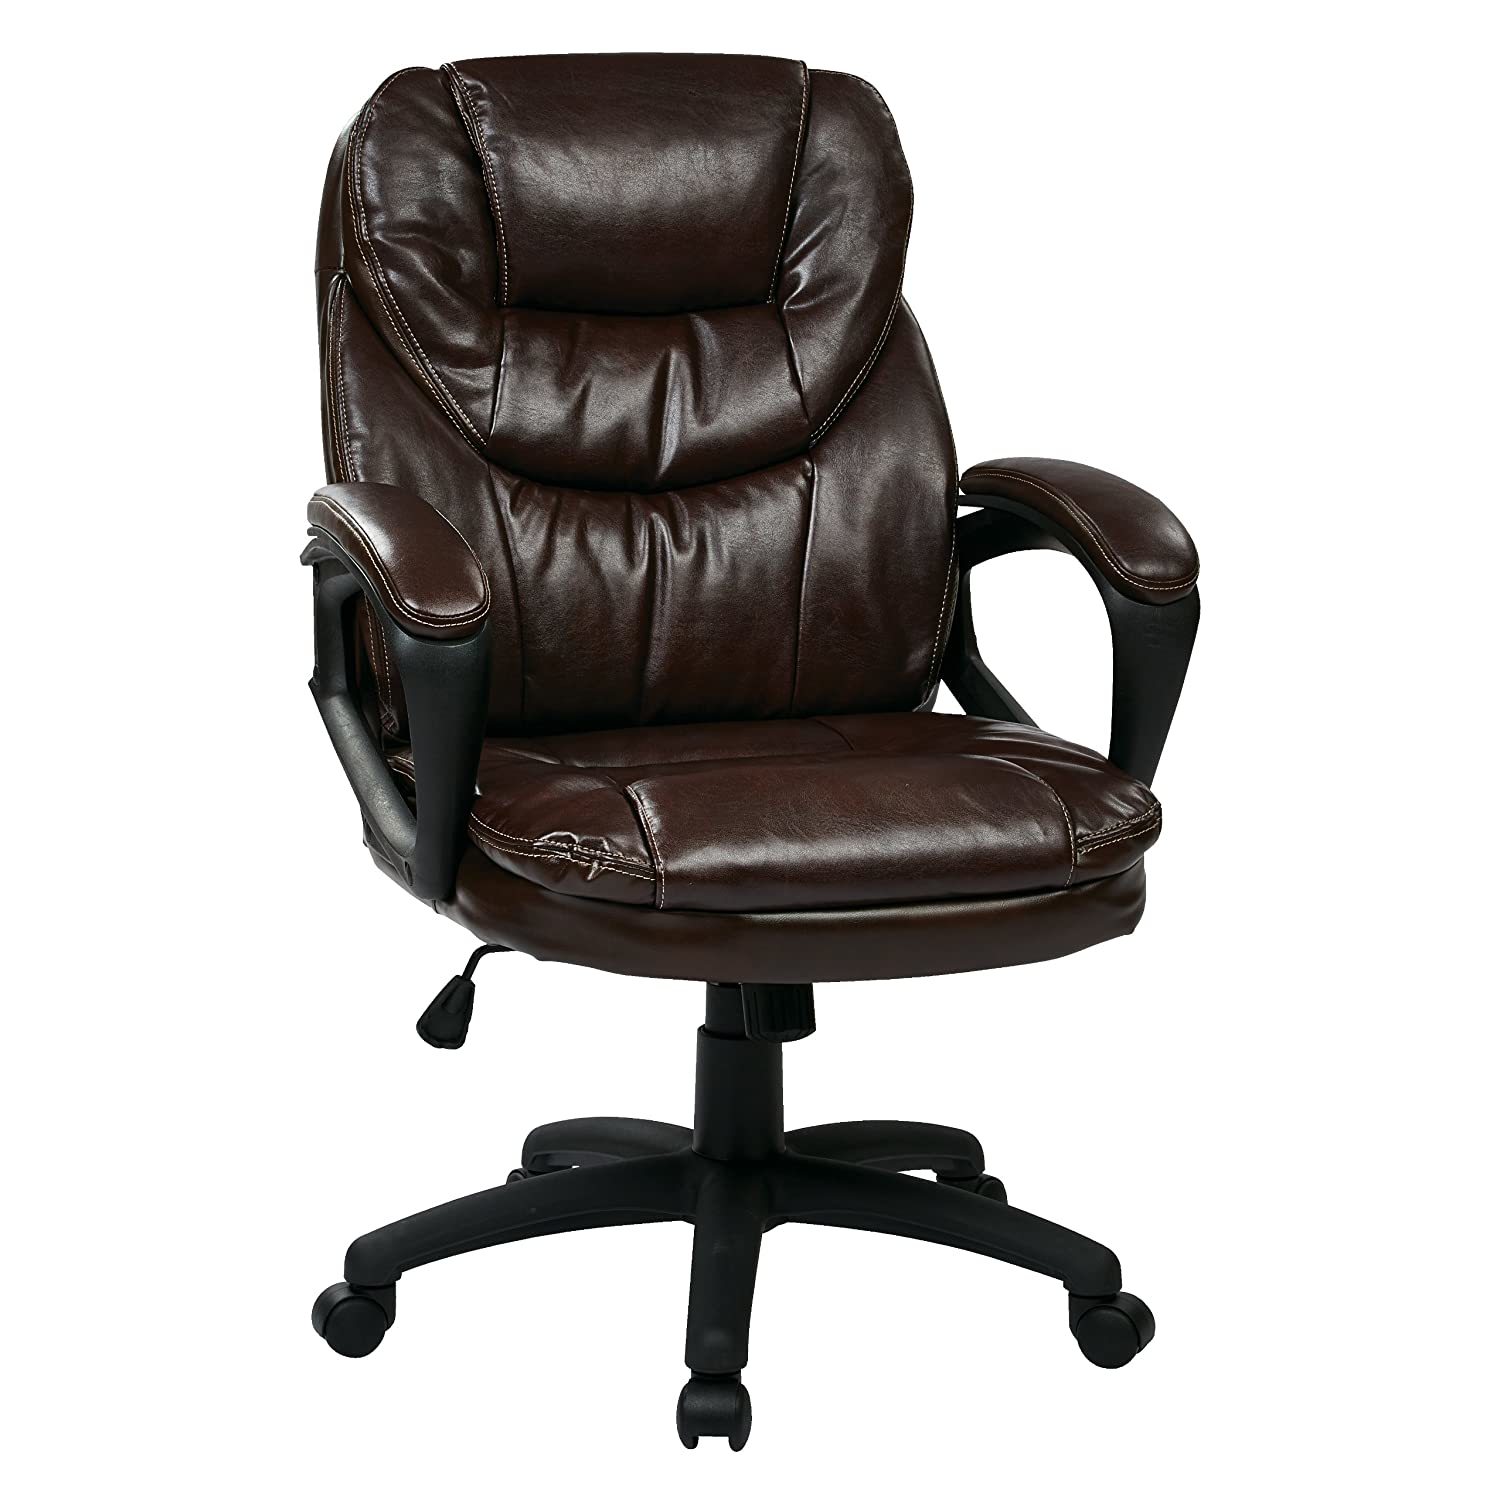 Office Star FL Series Faux Leather Manager's Adjustable Office Chair with Lumbar - $167.99